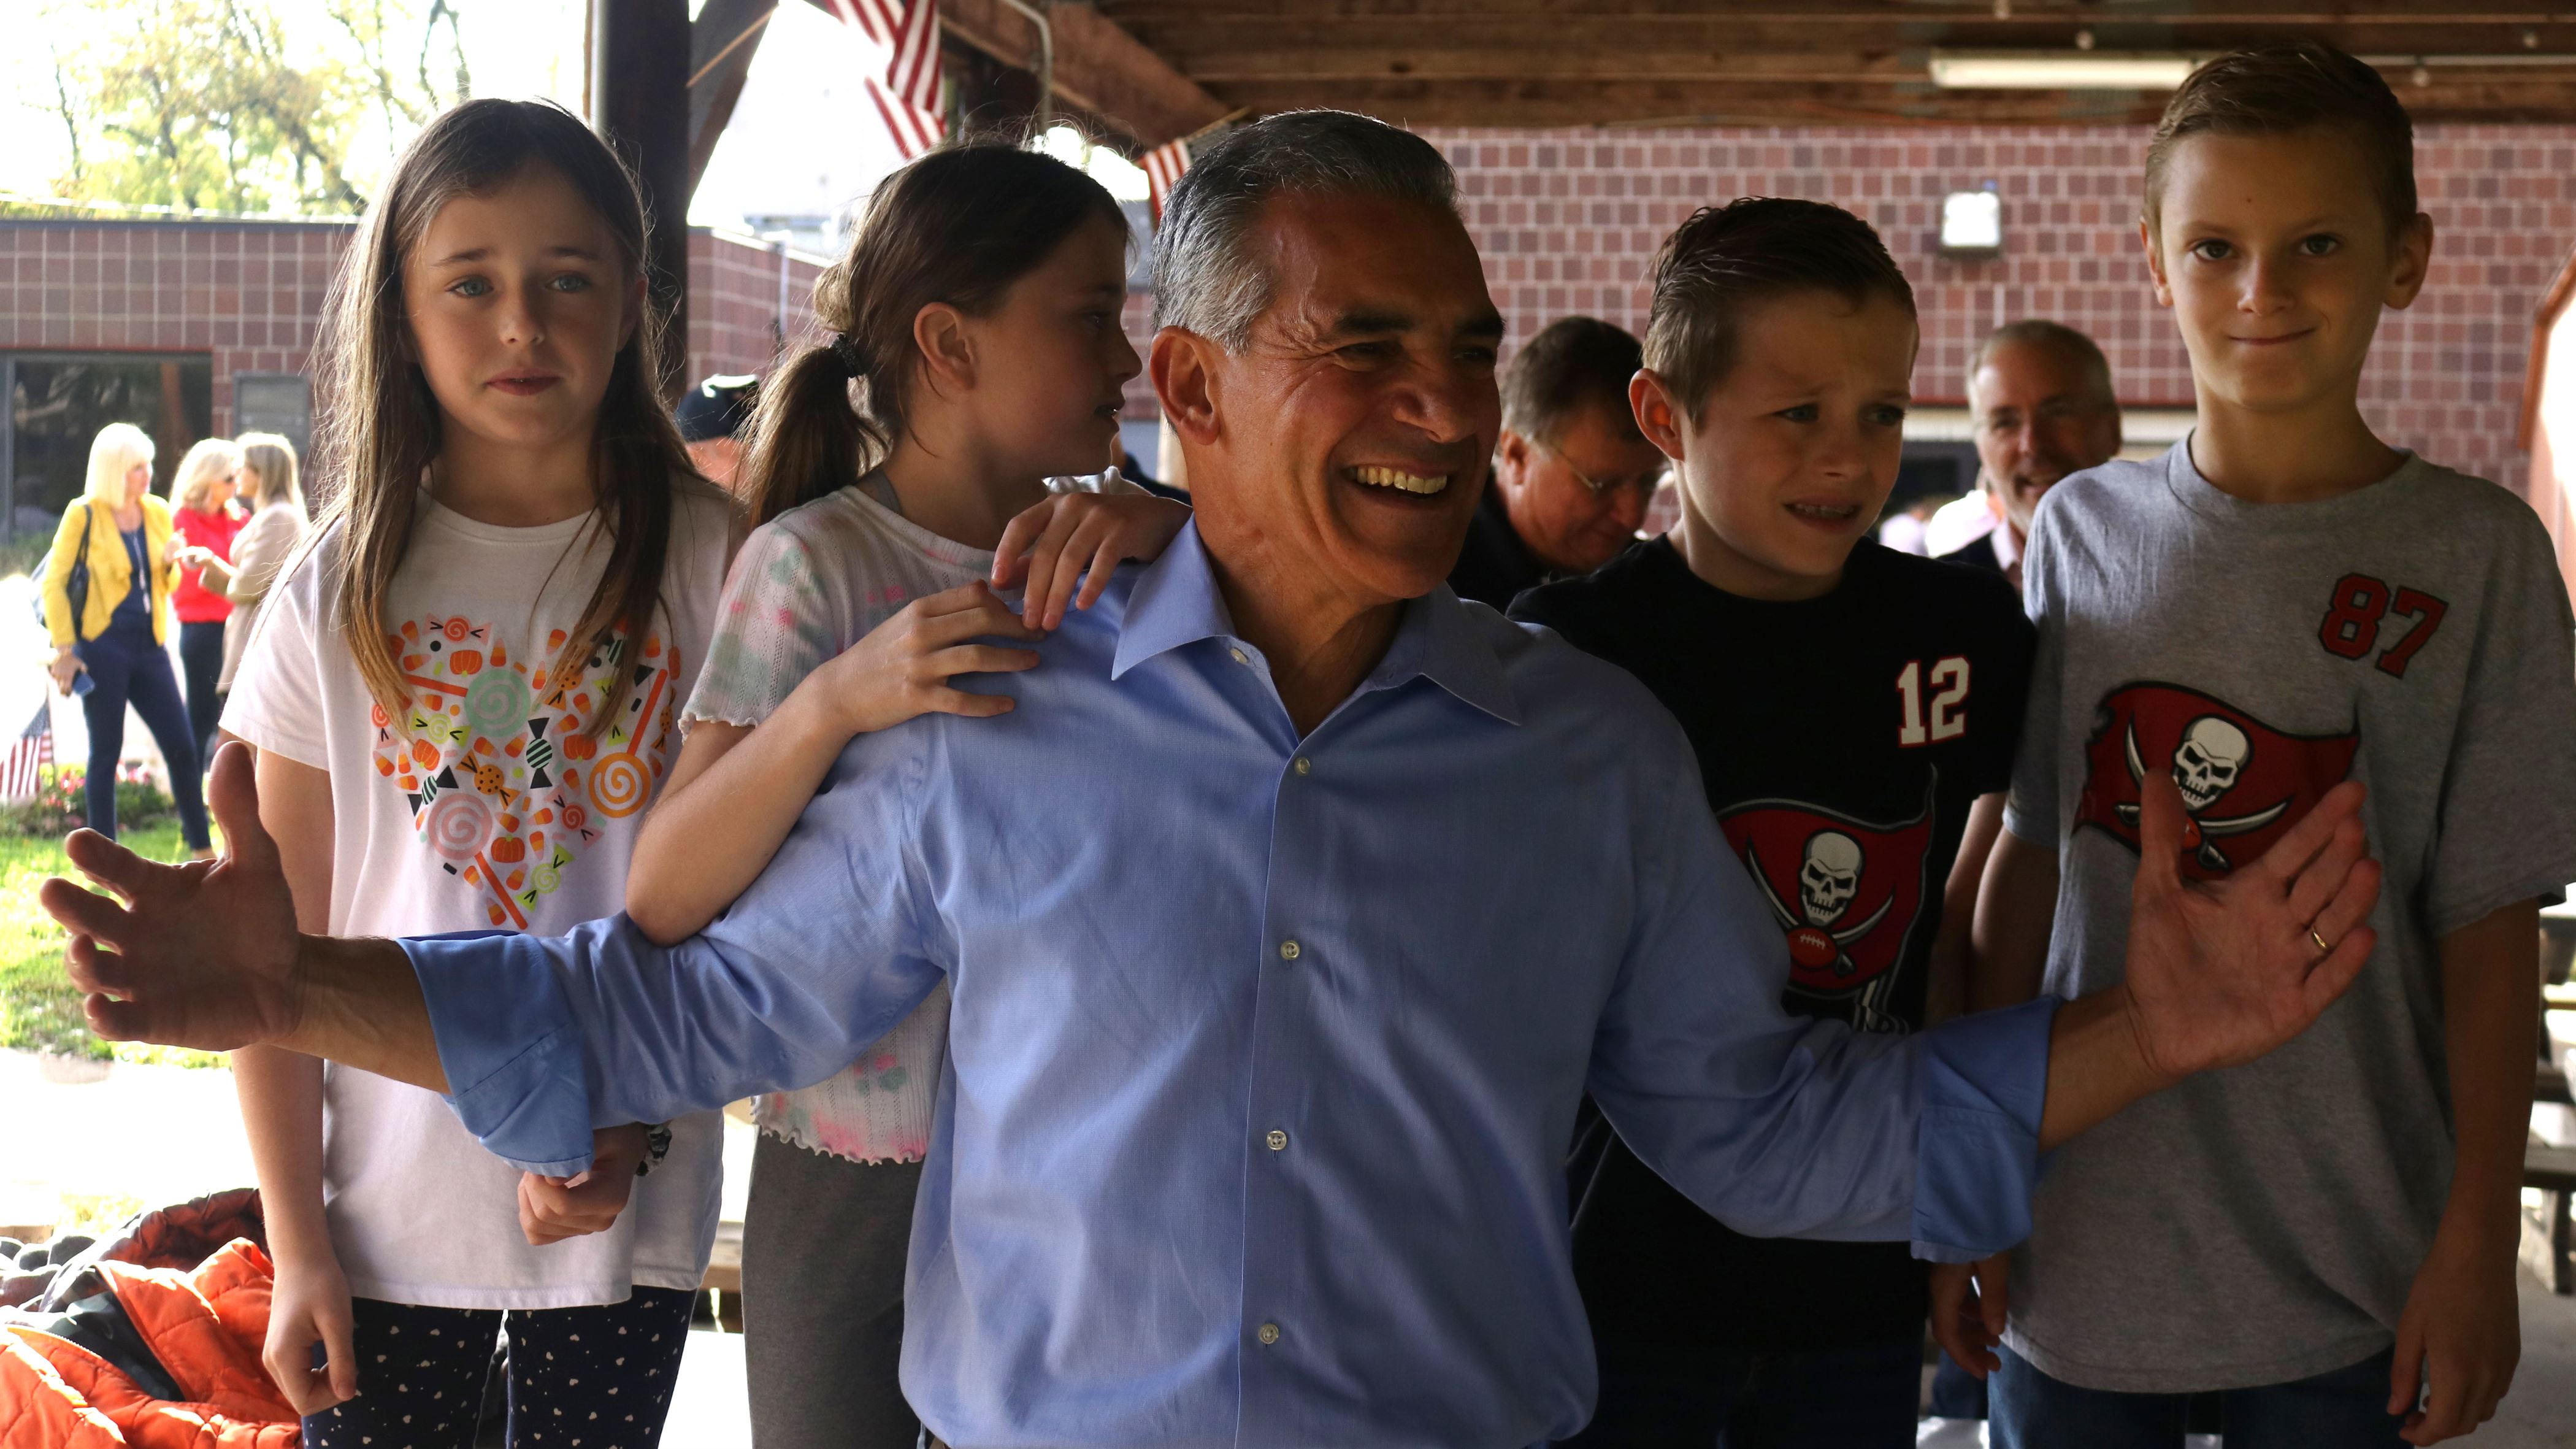 Republican gubernatorial candidate Jack Ciattarelli poses for photos with children in Morris Plains, New Jersey. Francis Churchill | The Montclarion